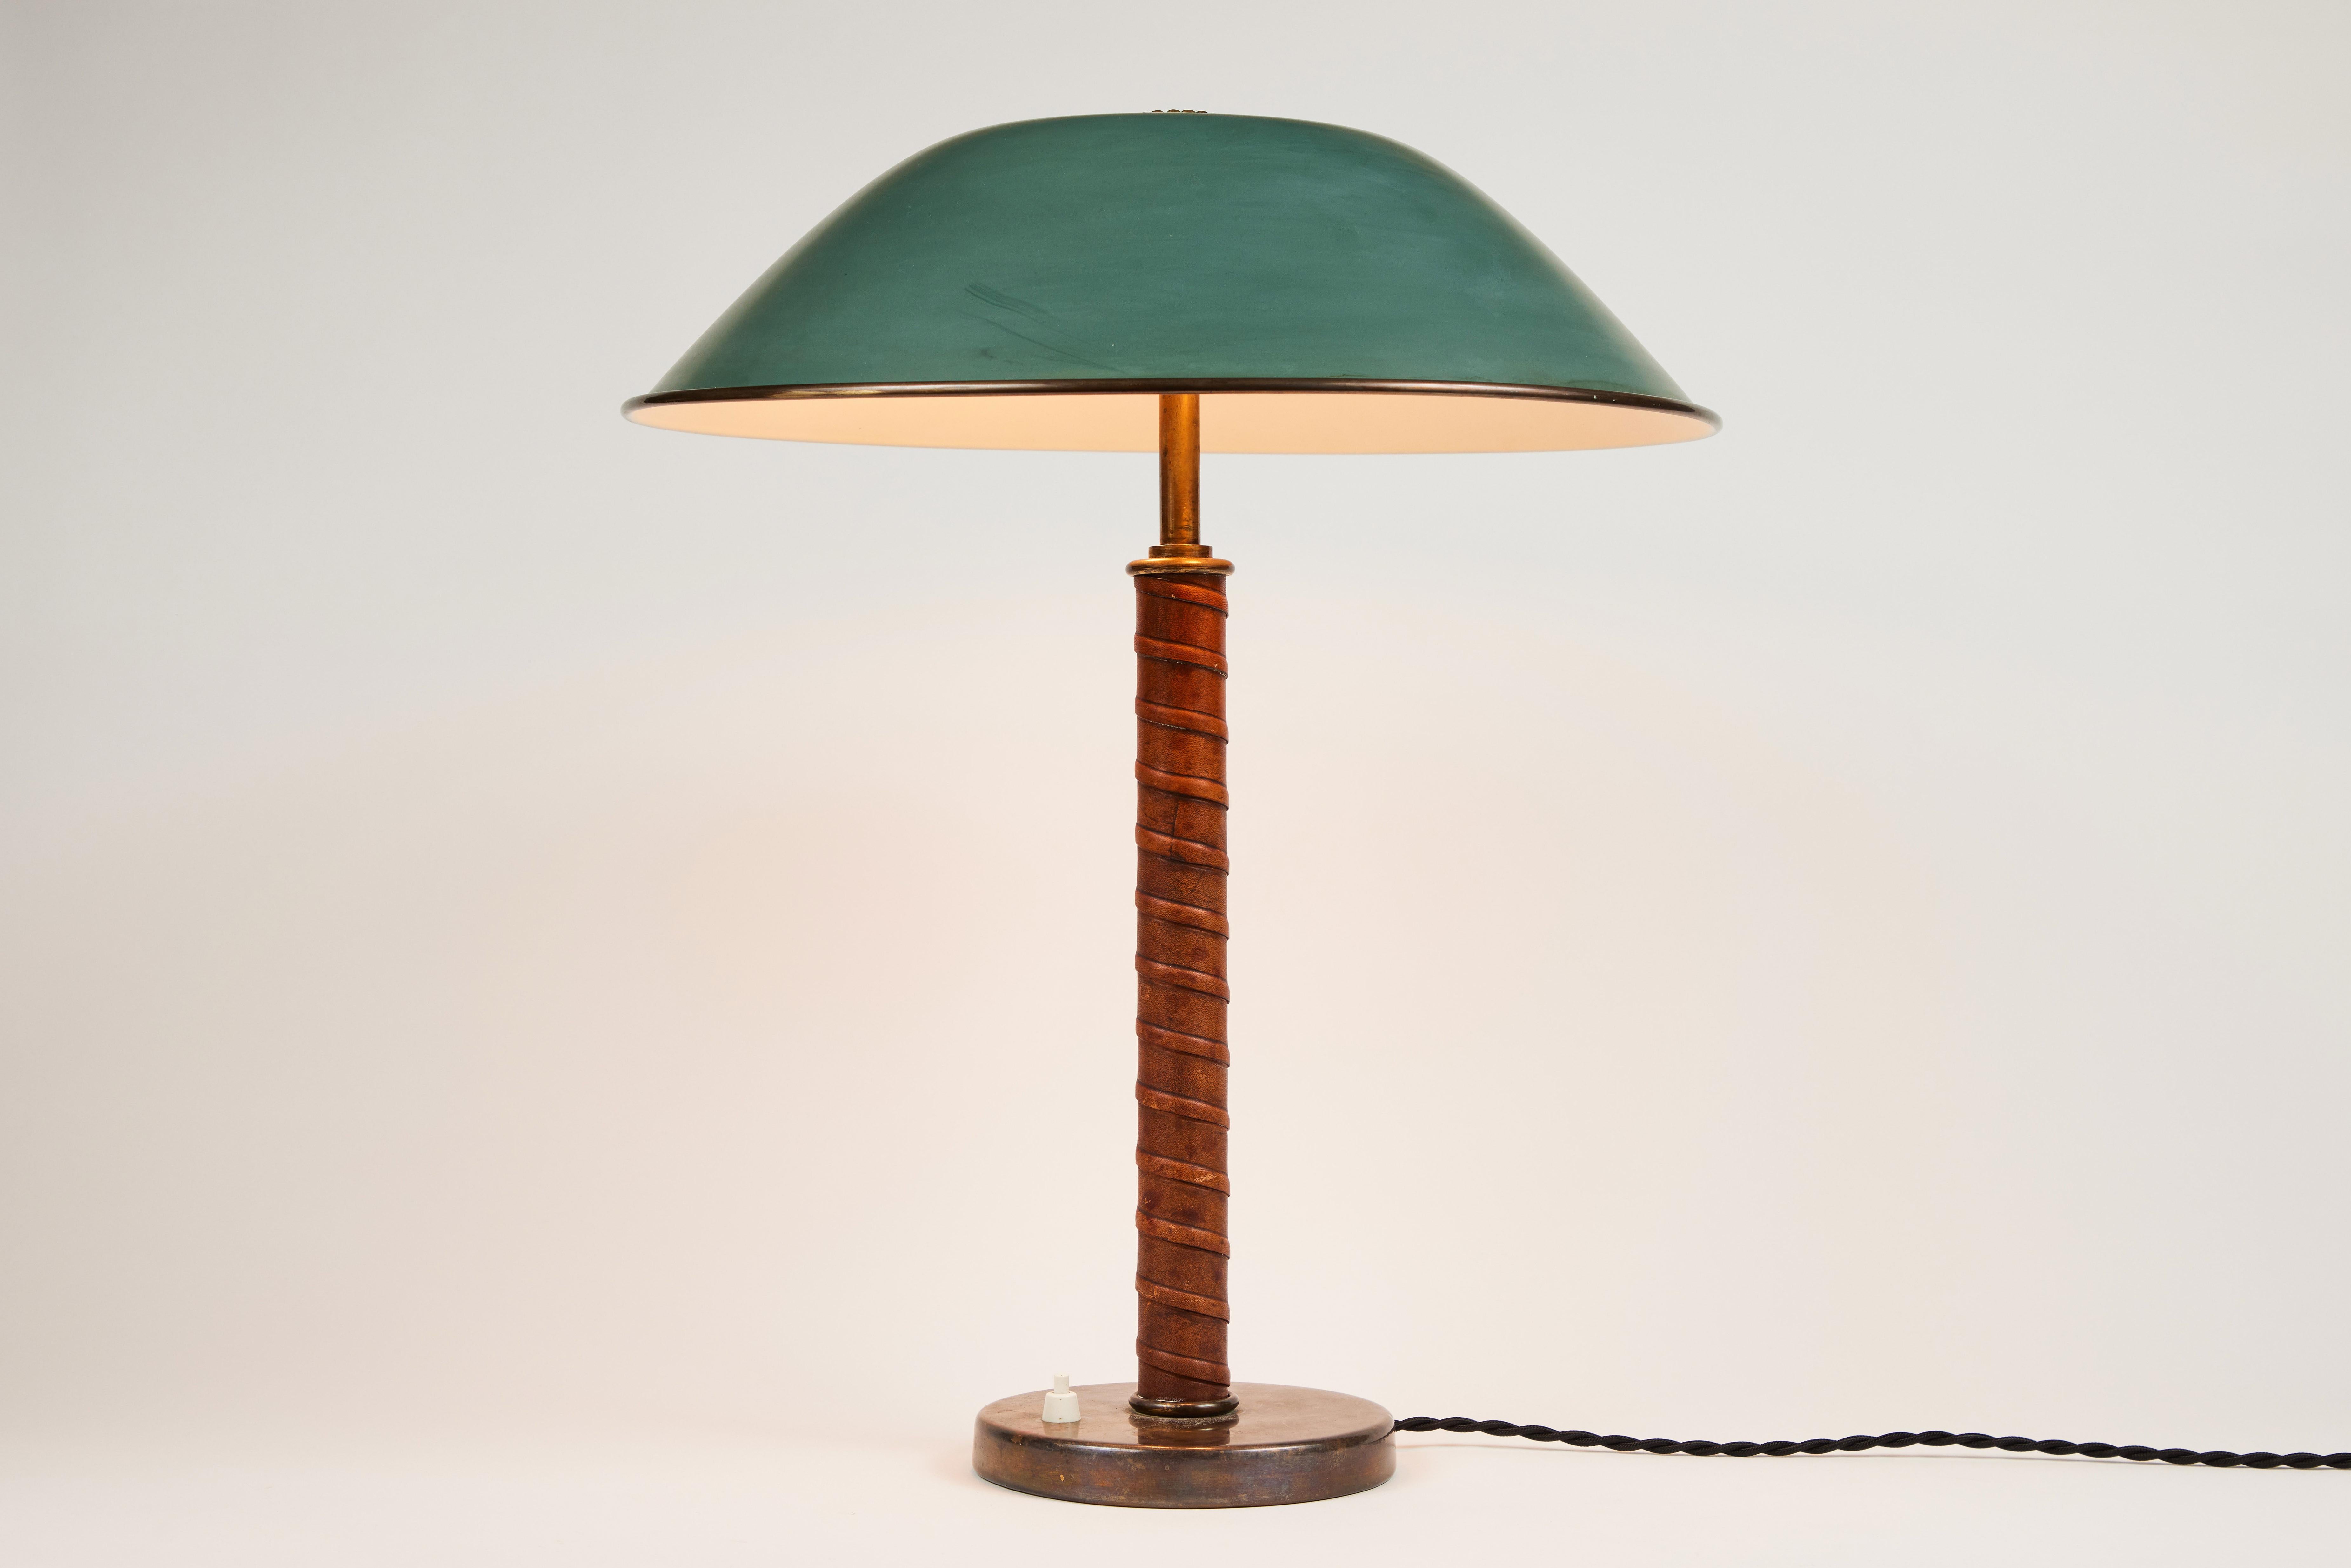 1940s Böhlmarks brass and leather table lamp. Produced by the iconic Swedish lamp maker circa 1940 and executed in green painted metal, brass and beautifully distressed but tight leather wrapping. Reminiscent of the early designs of Paavo Tynell for